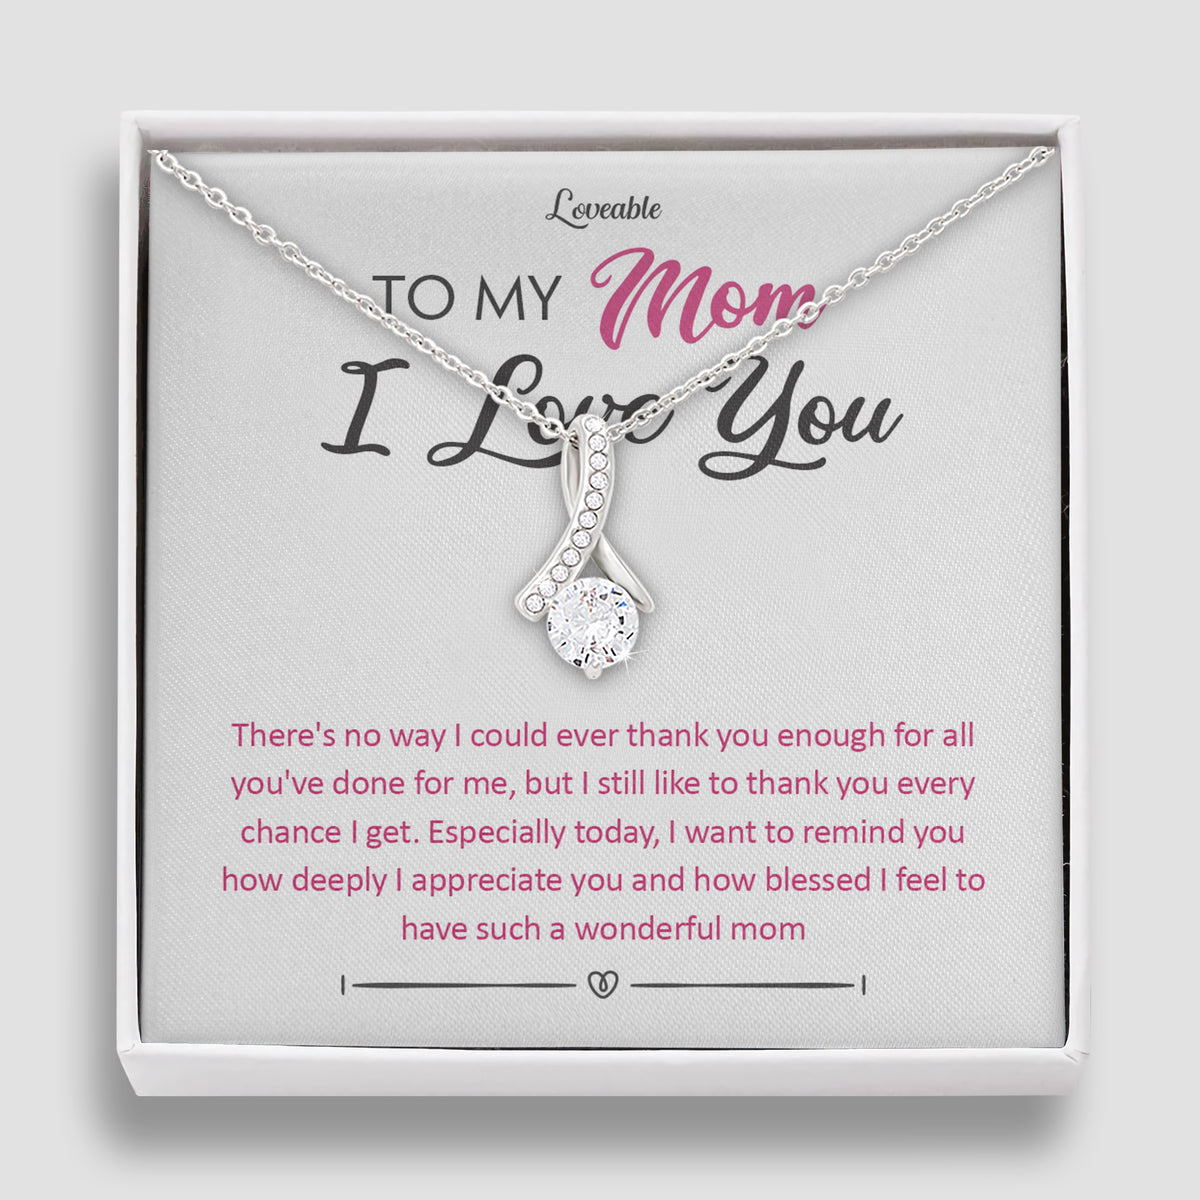 To My Mom I Love You - Best Crystal Gifts for Mom